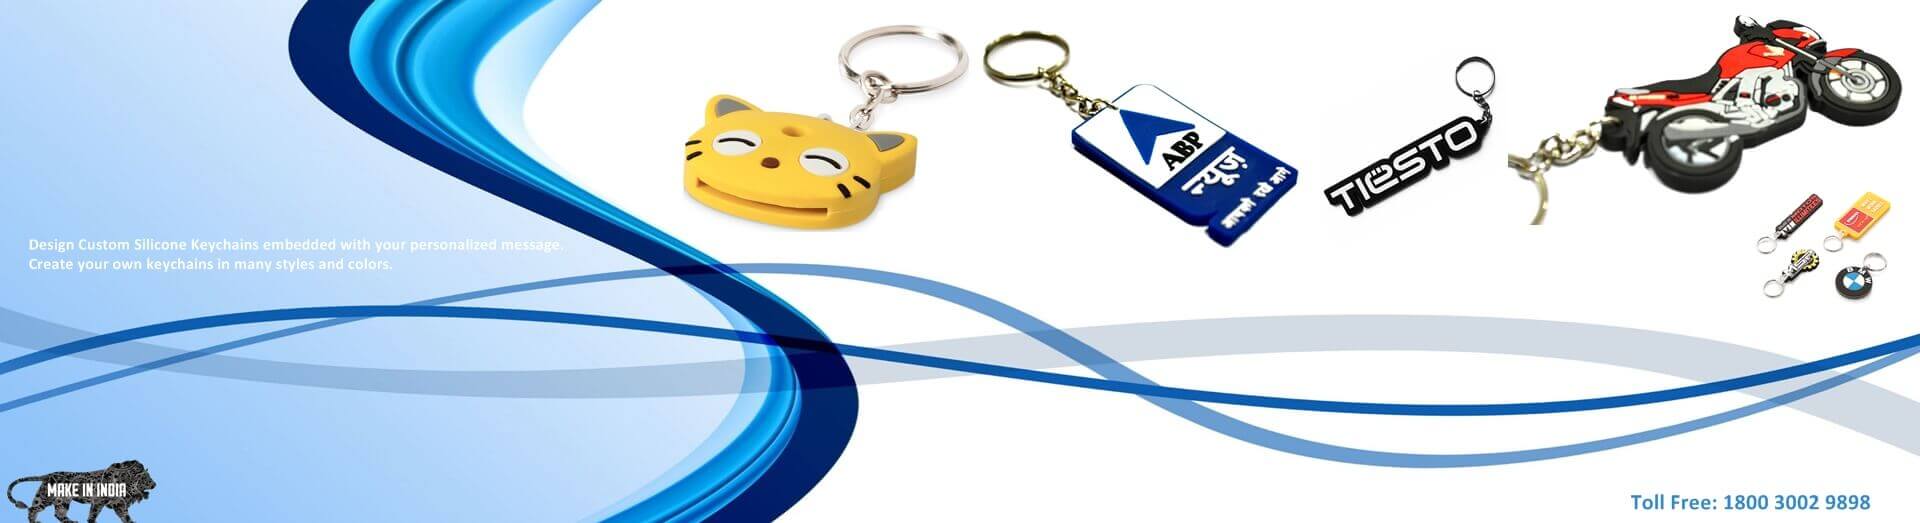 Rubber Keychain Manufacturer in Ludhiana,Keychain in Ludhiana,Keychain Manufacturer in Banglore,Promotional Keychain in Ludhiana,Customized Keychain in Banglore,Keychain Wholesaler in Ludhiana 